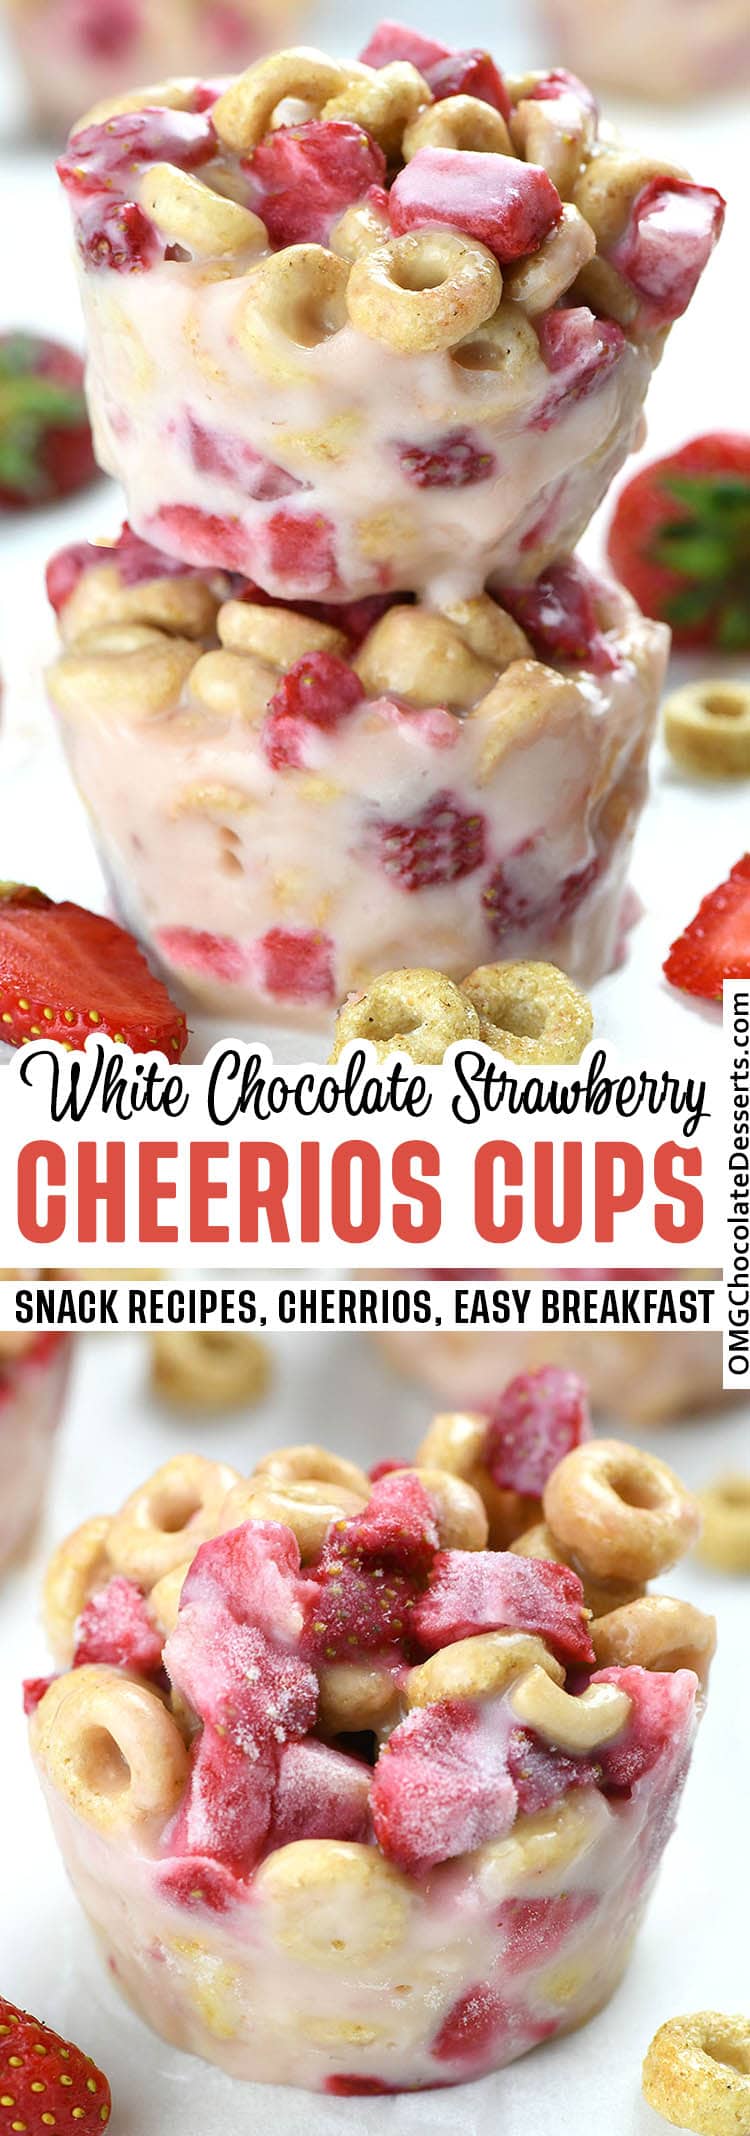 White Chocolate Strawberry Cheerios Cups - two different images.